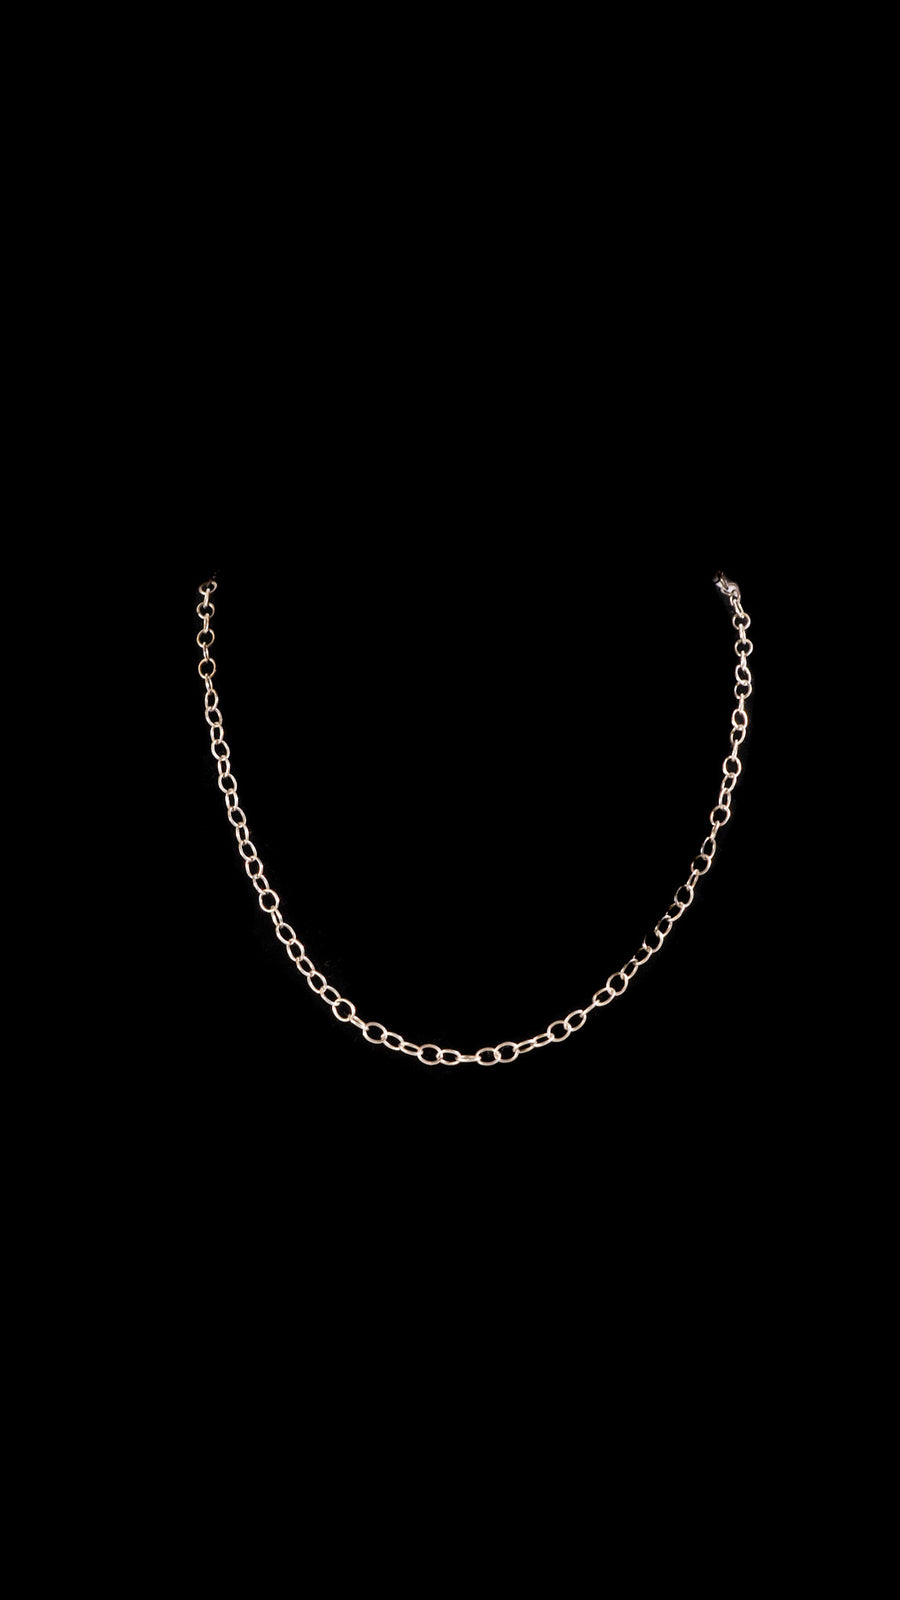 Round Chain Necklace Sterling Silver 18" by VK Designs